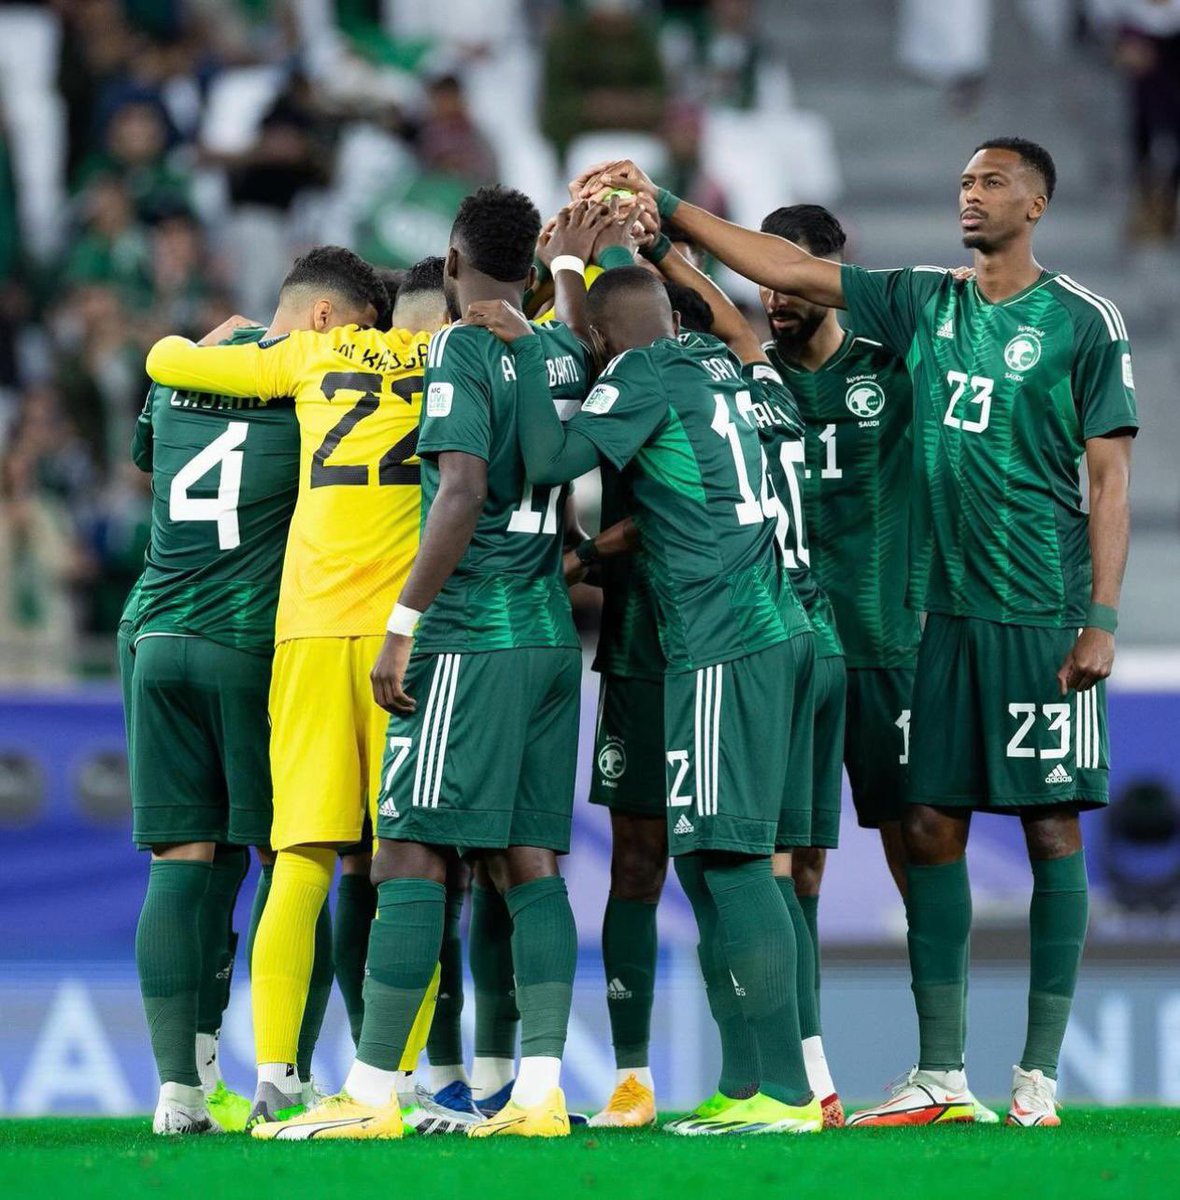 In life you learn from tough moments. The end result hurts but it will only further fuel our determination for what is ahead! Thank you to the fans across the country for your energy and support. 🇸🇦 The players, coaches and staff will do everything to give you success.